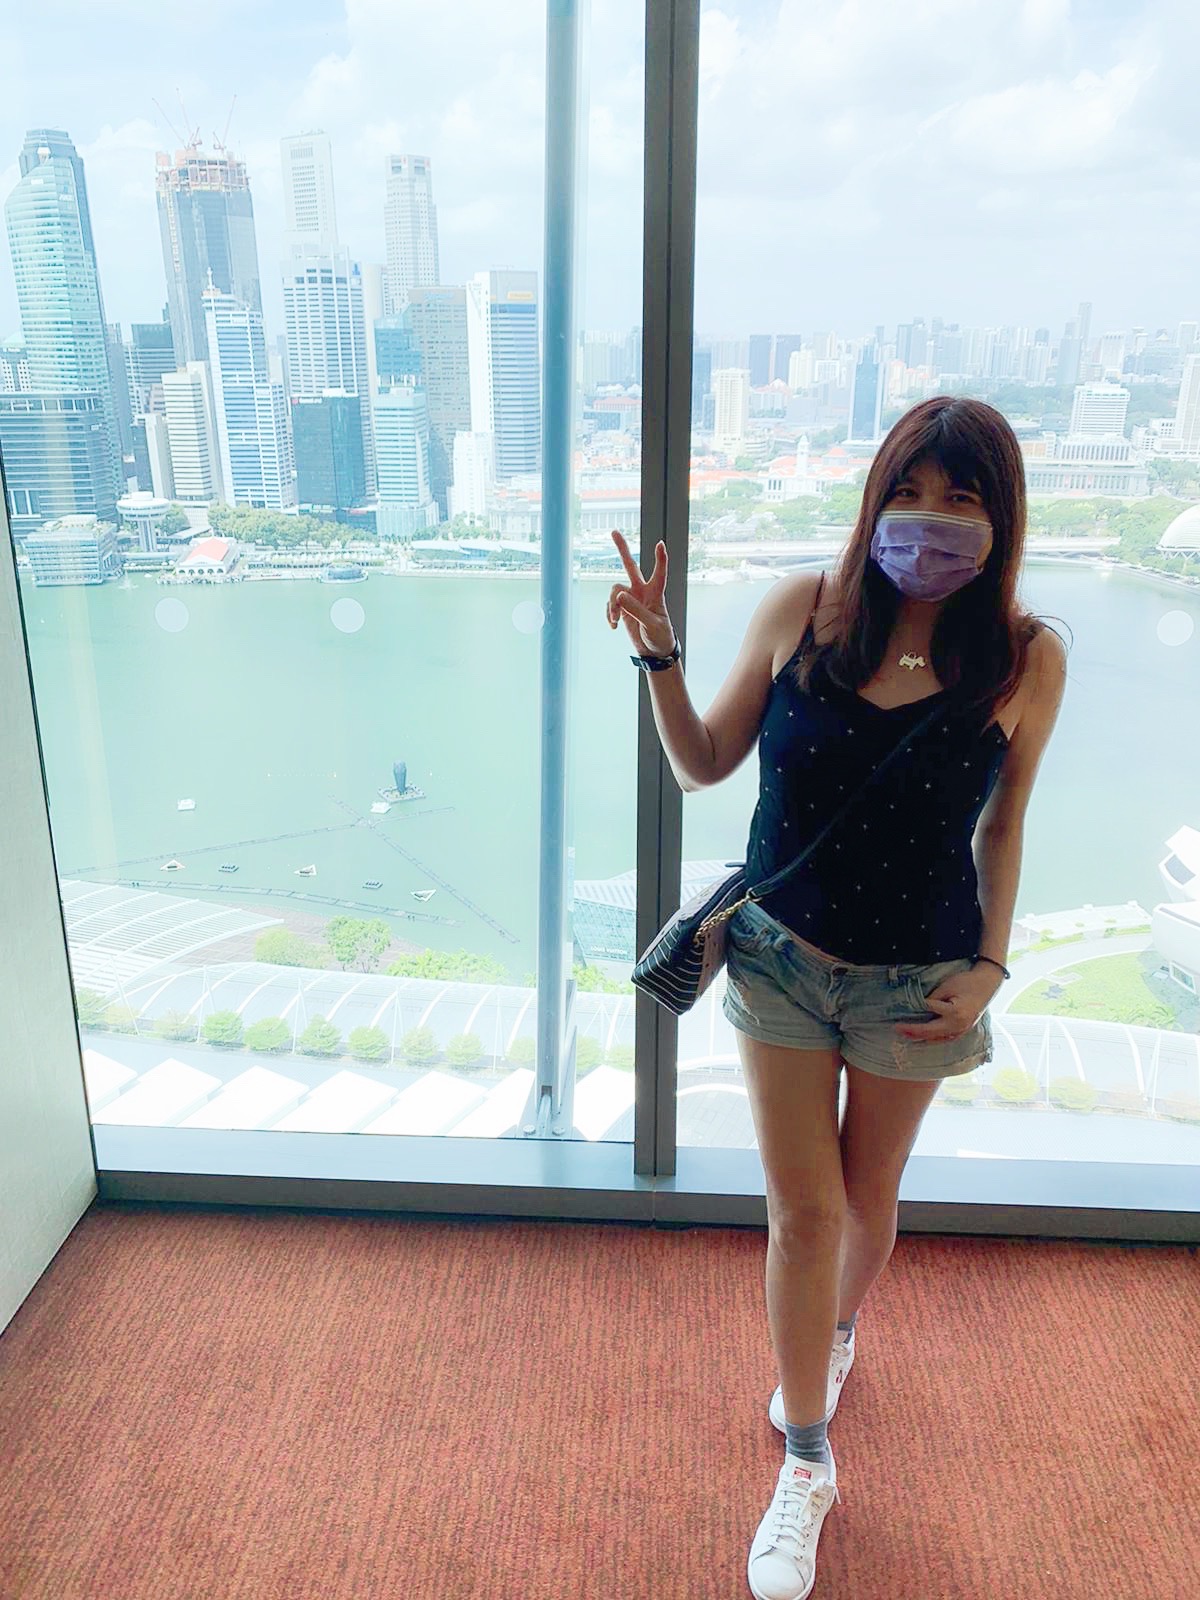 Staycation] 3D2N at Marina Bay Sands Hotel